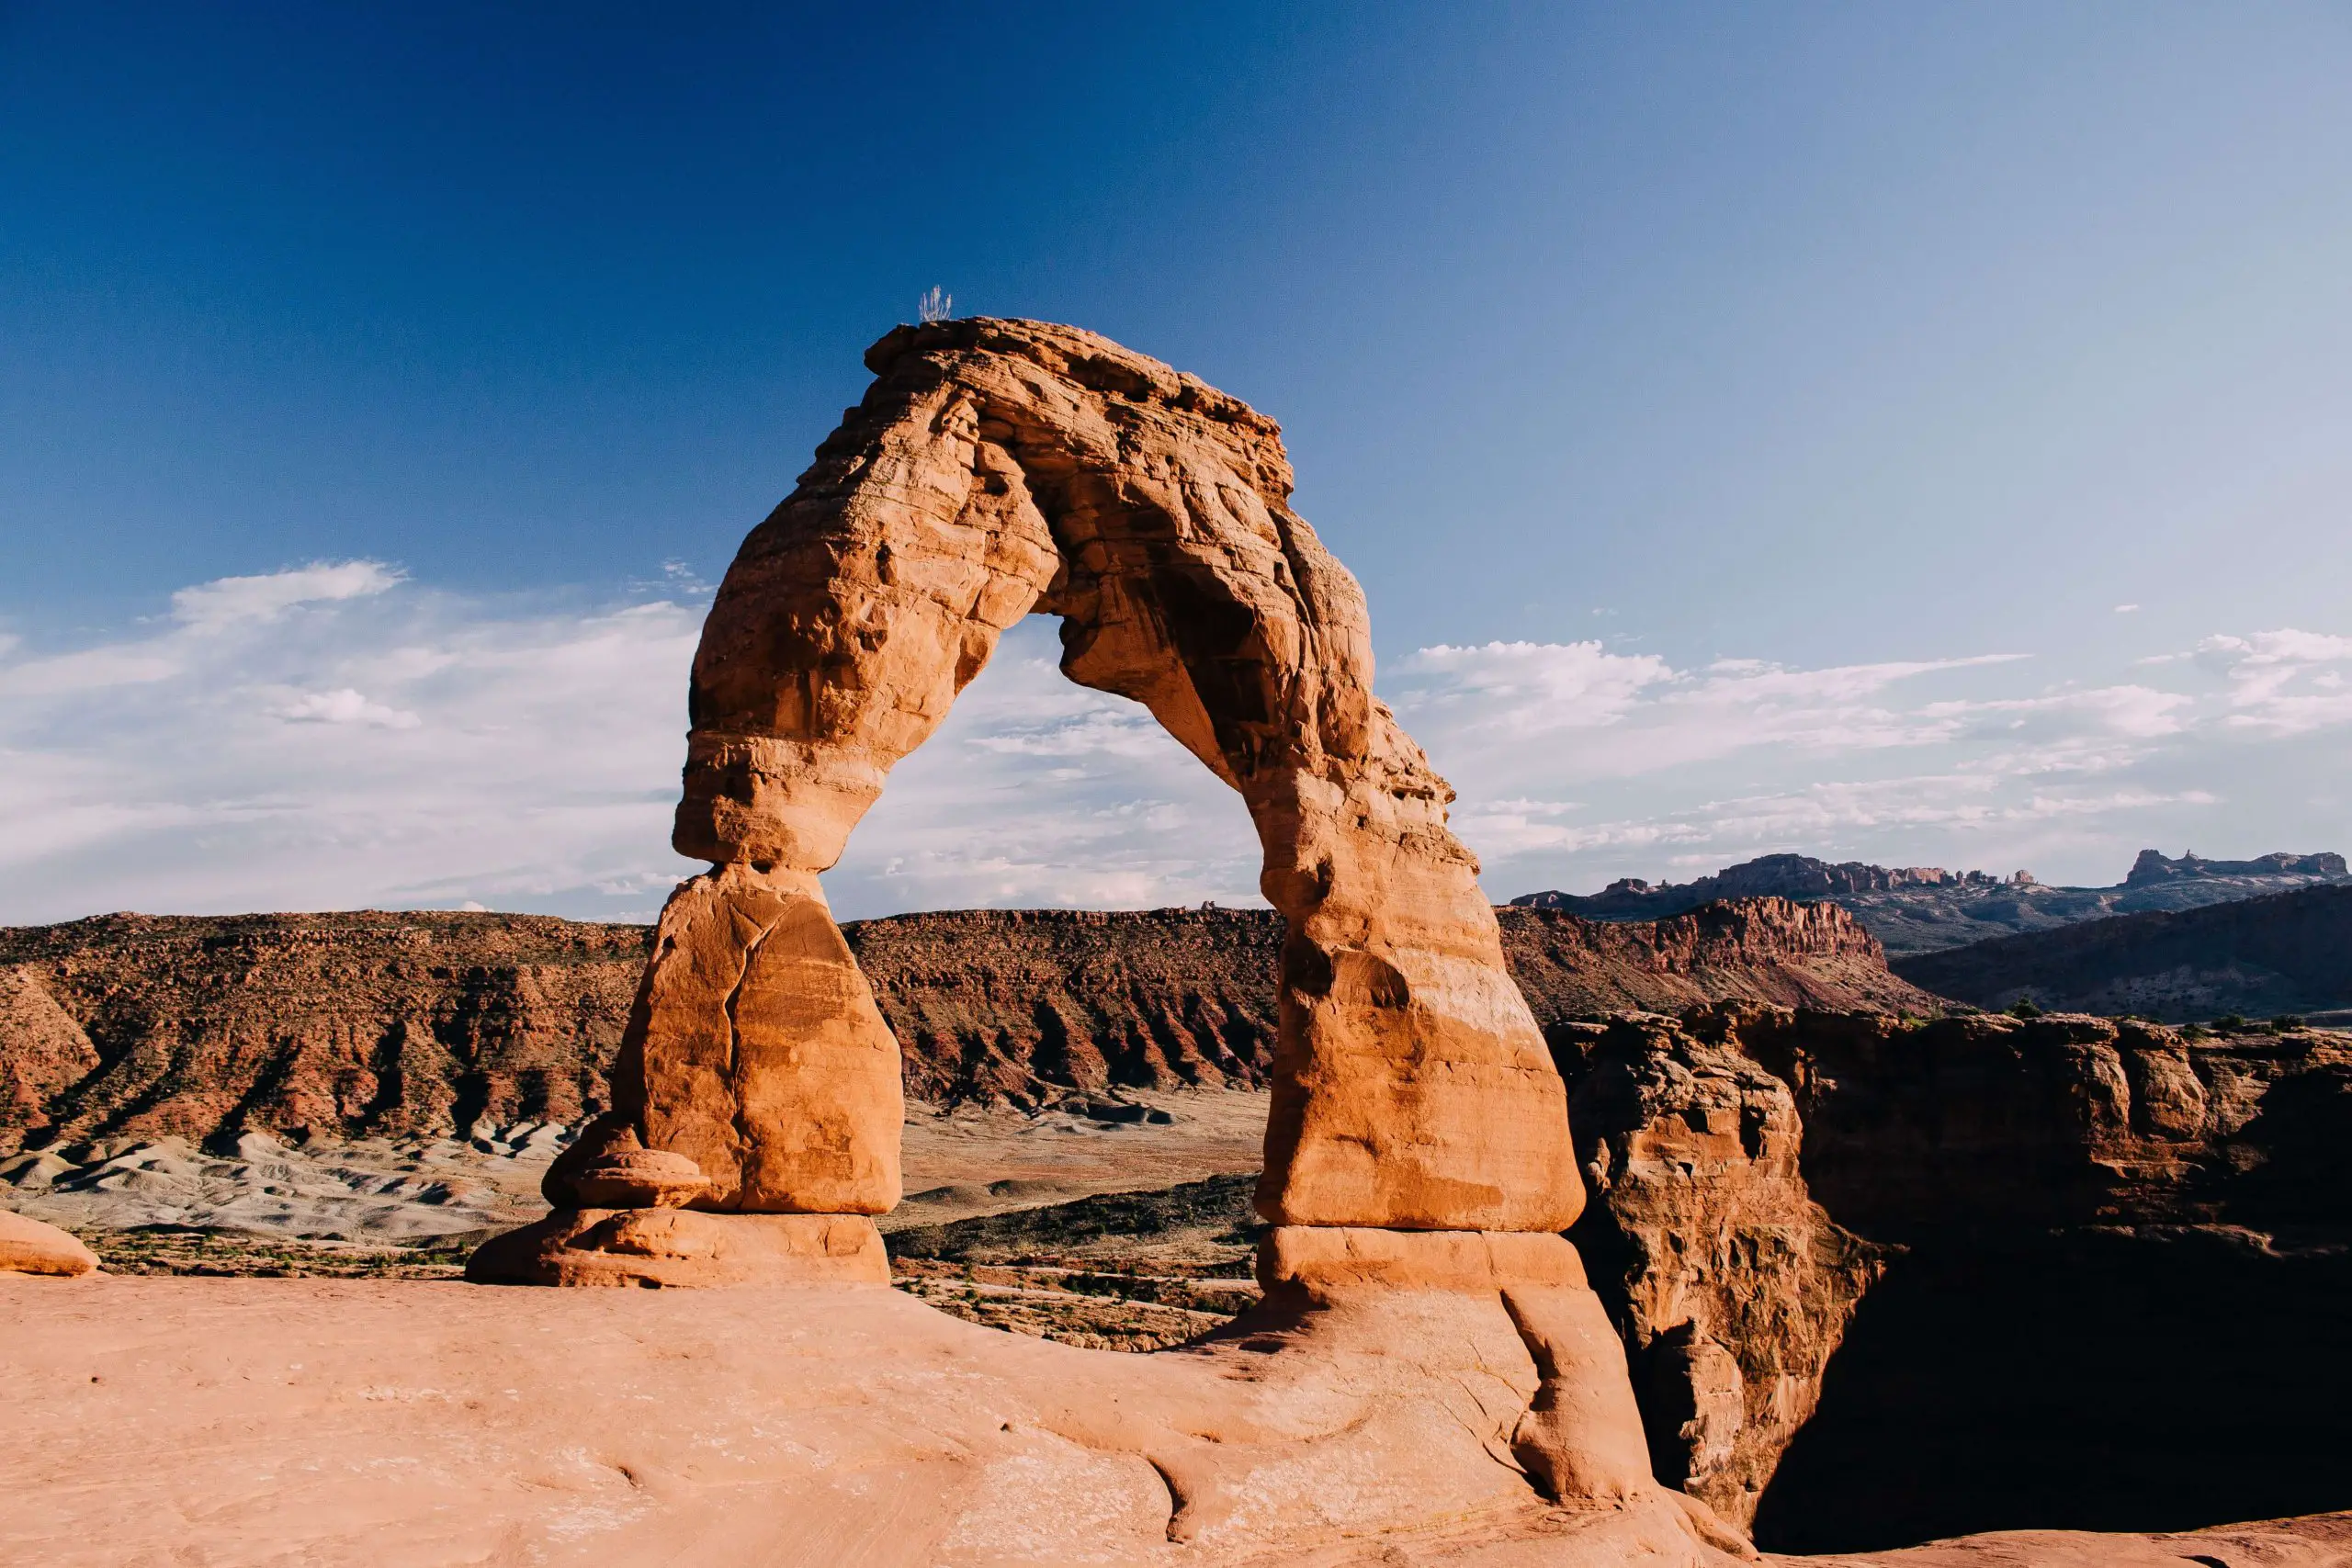 How much does it cost to enter Arches National Park?